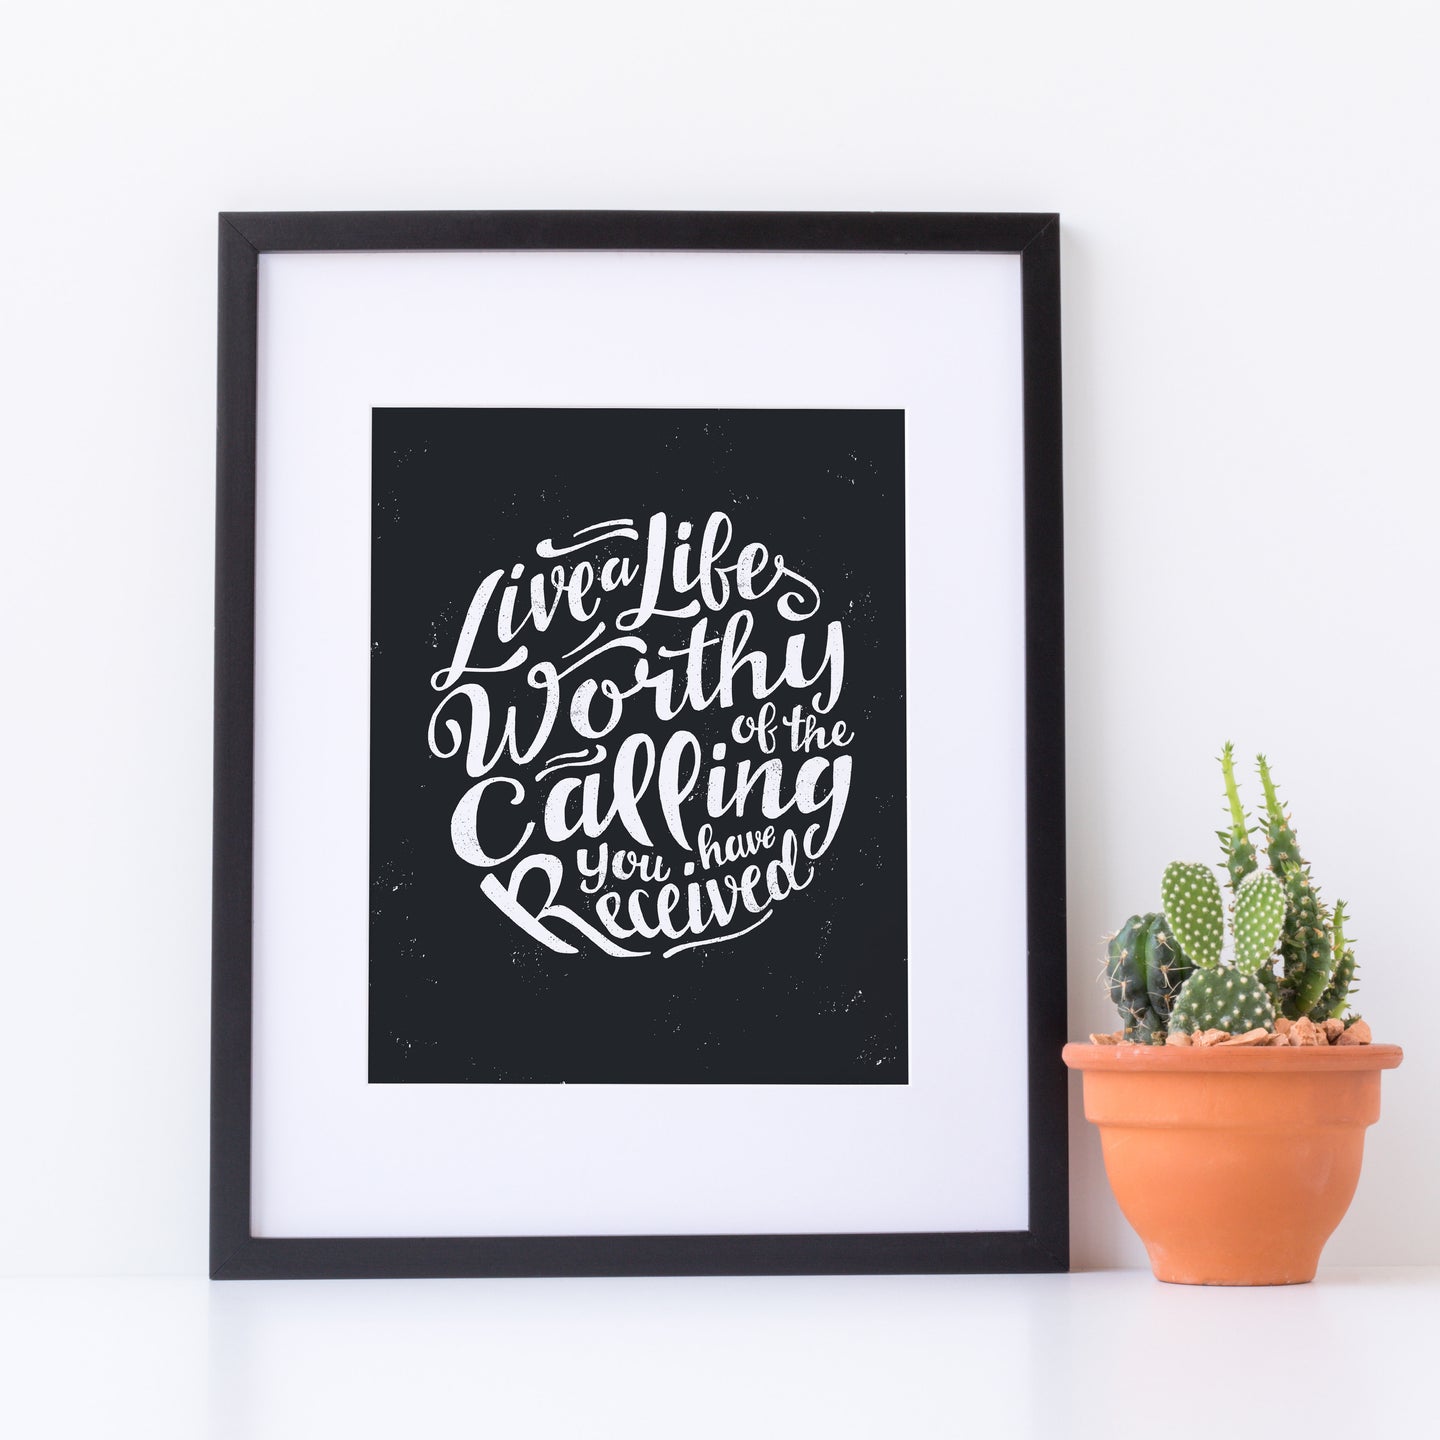 Artwork in a white frame with the with a white matte. The frame is leaning on a white tabletop with a terracotta pot with a cactus. The artwork is on a black background with some white texture to give a vintage look. The text is in white and reads “Live a life worthy of the calling you have received.” 